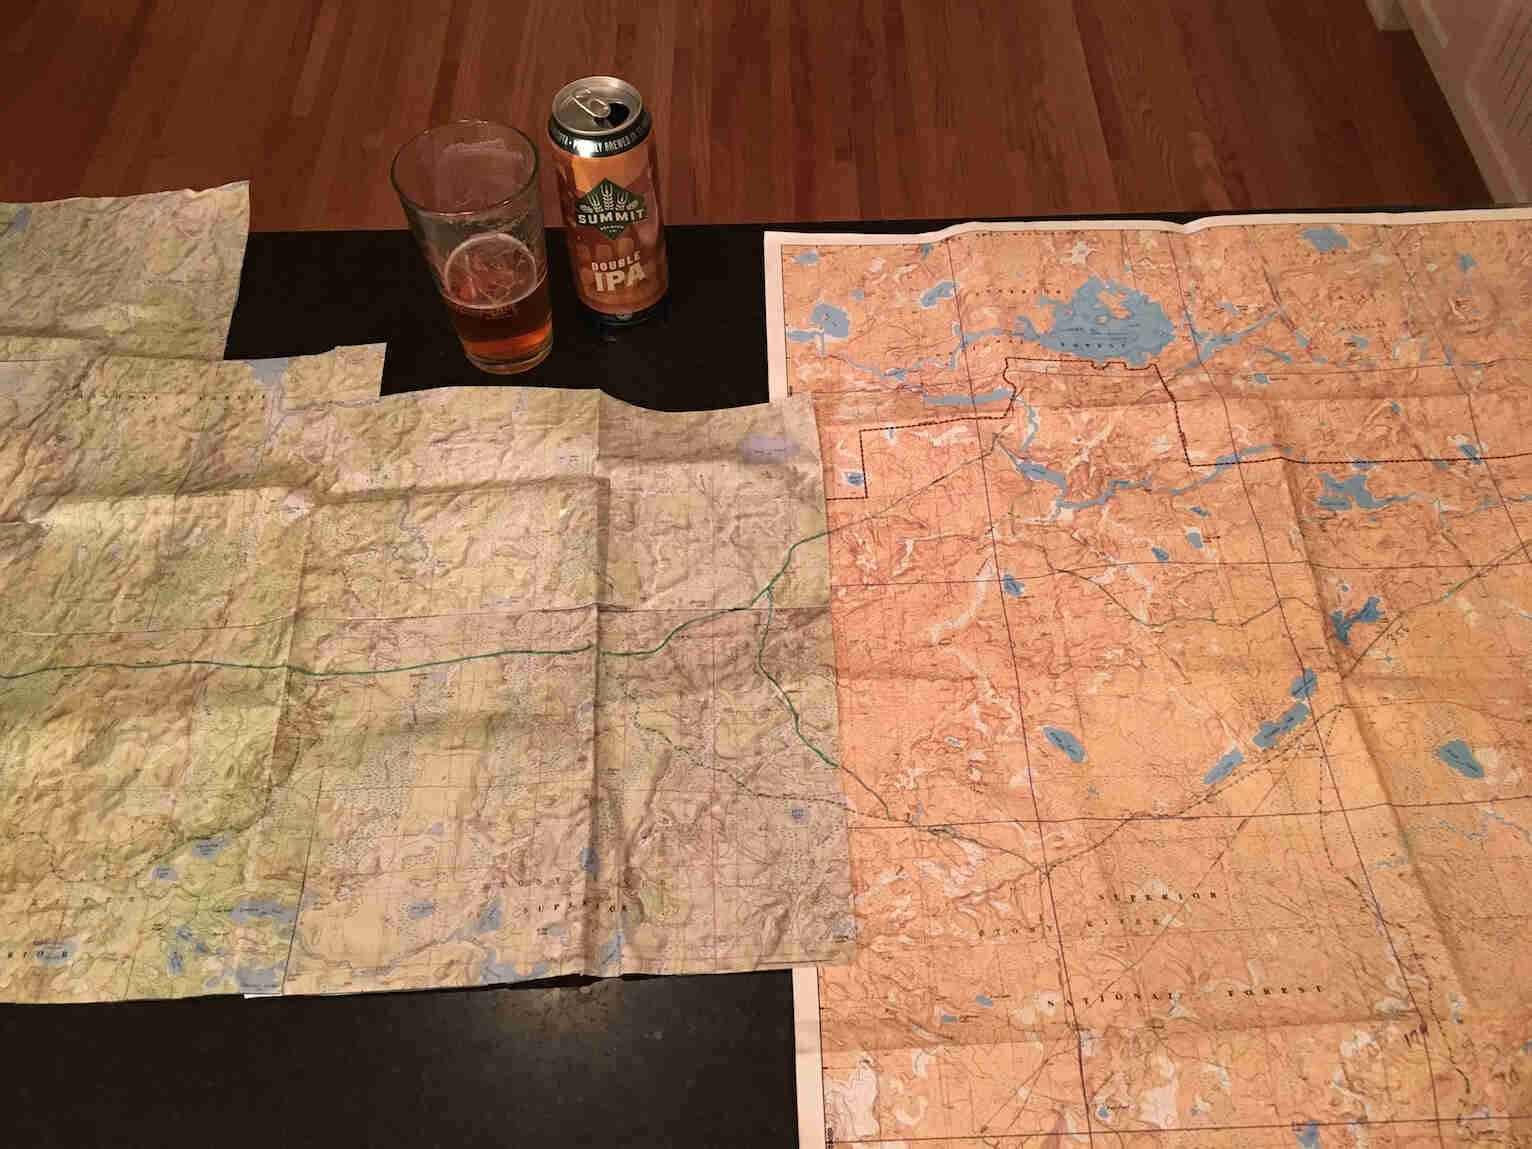 Downward view of two maps, a glass of beer and can, on a table top